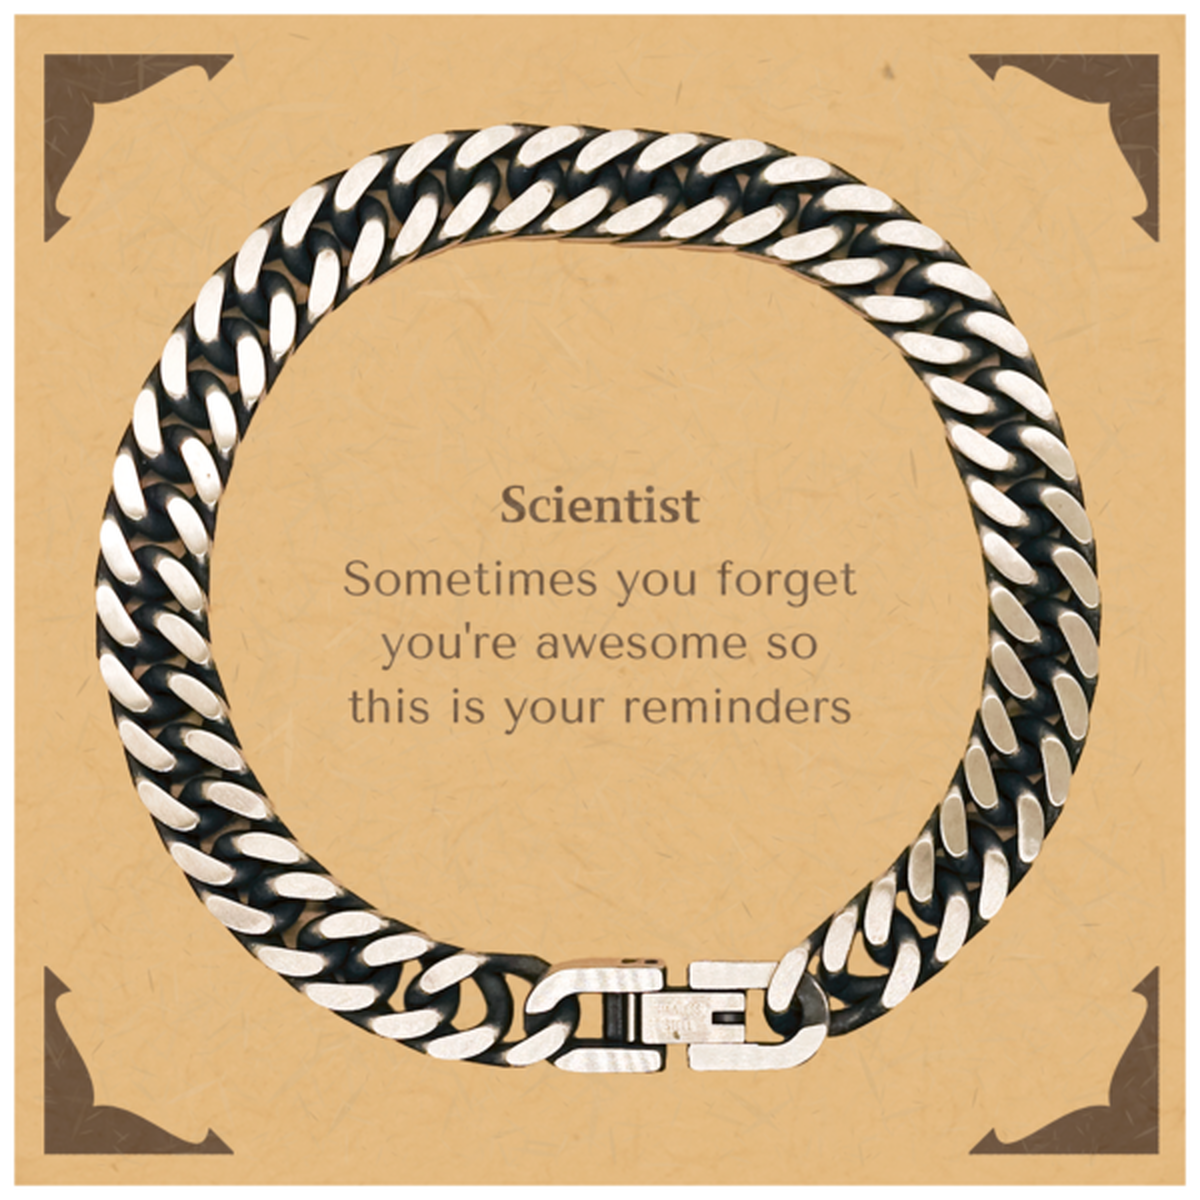 Sentimental Scientist Cuban Link Chain Bracelet, Scientist Sometimes you forget you're awesome so this is your reminders, Graduation Christmas Birthday Gifts for Scientist, Men, Women, Coworkers